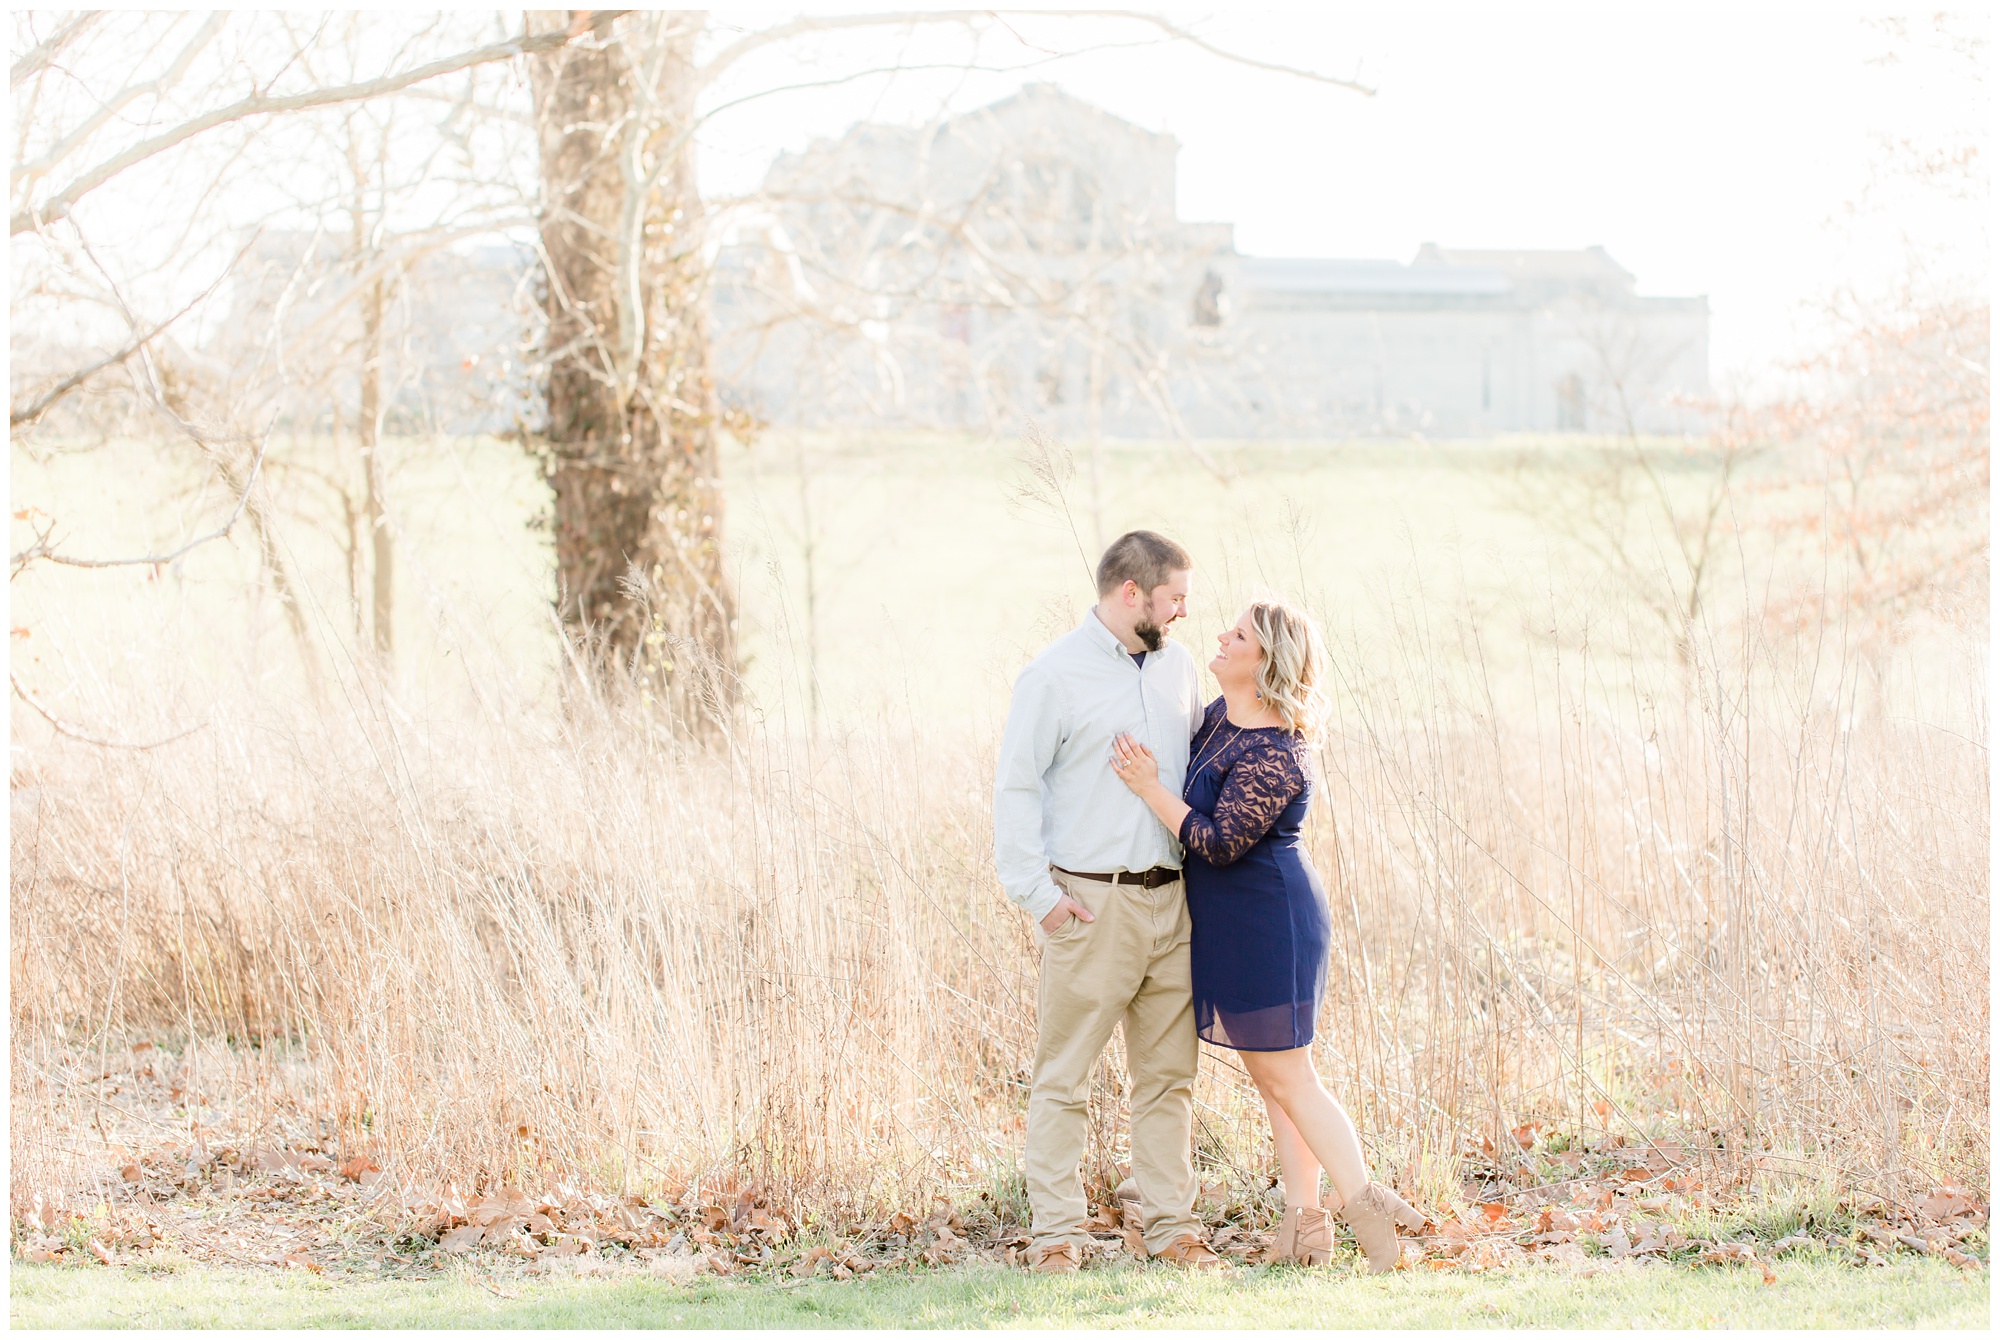 Forest Park Engagement Session Emily Broadbent Photography